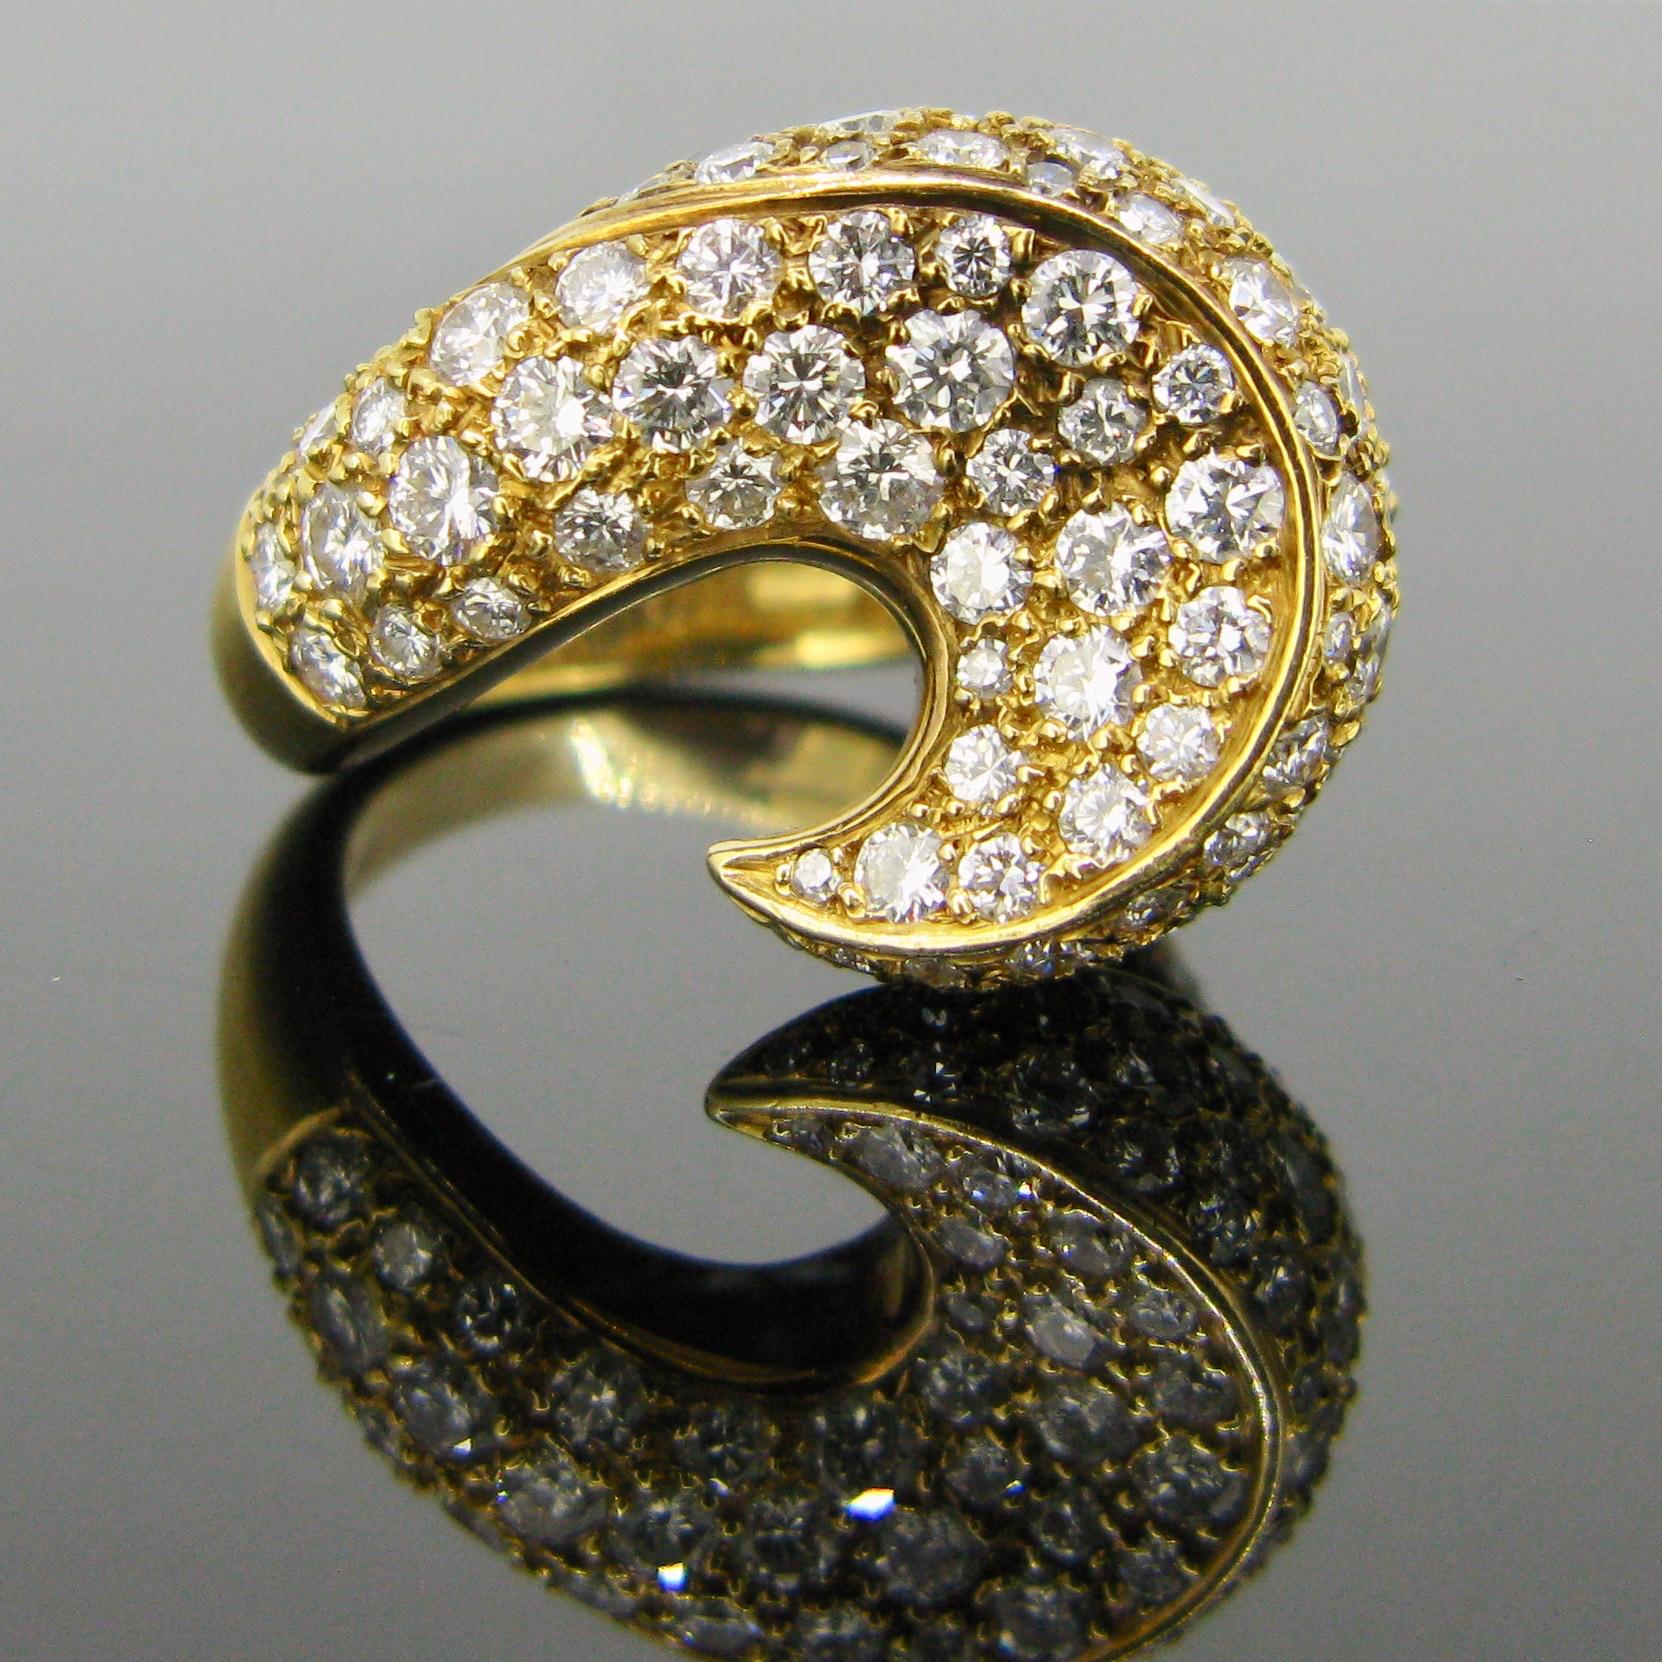 This new modern ring is made in 18kt yellow gold, it has 101 diamonds with a total carat weight of 4ct approximately. It has a wave like design.

Weight:	12.1gr 

Circa:	Modern

Metal:		18kt Yellow Gold 

Stones:	101 Diamonds
•	Total Carat